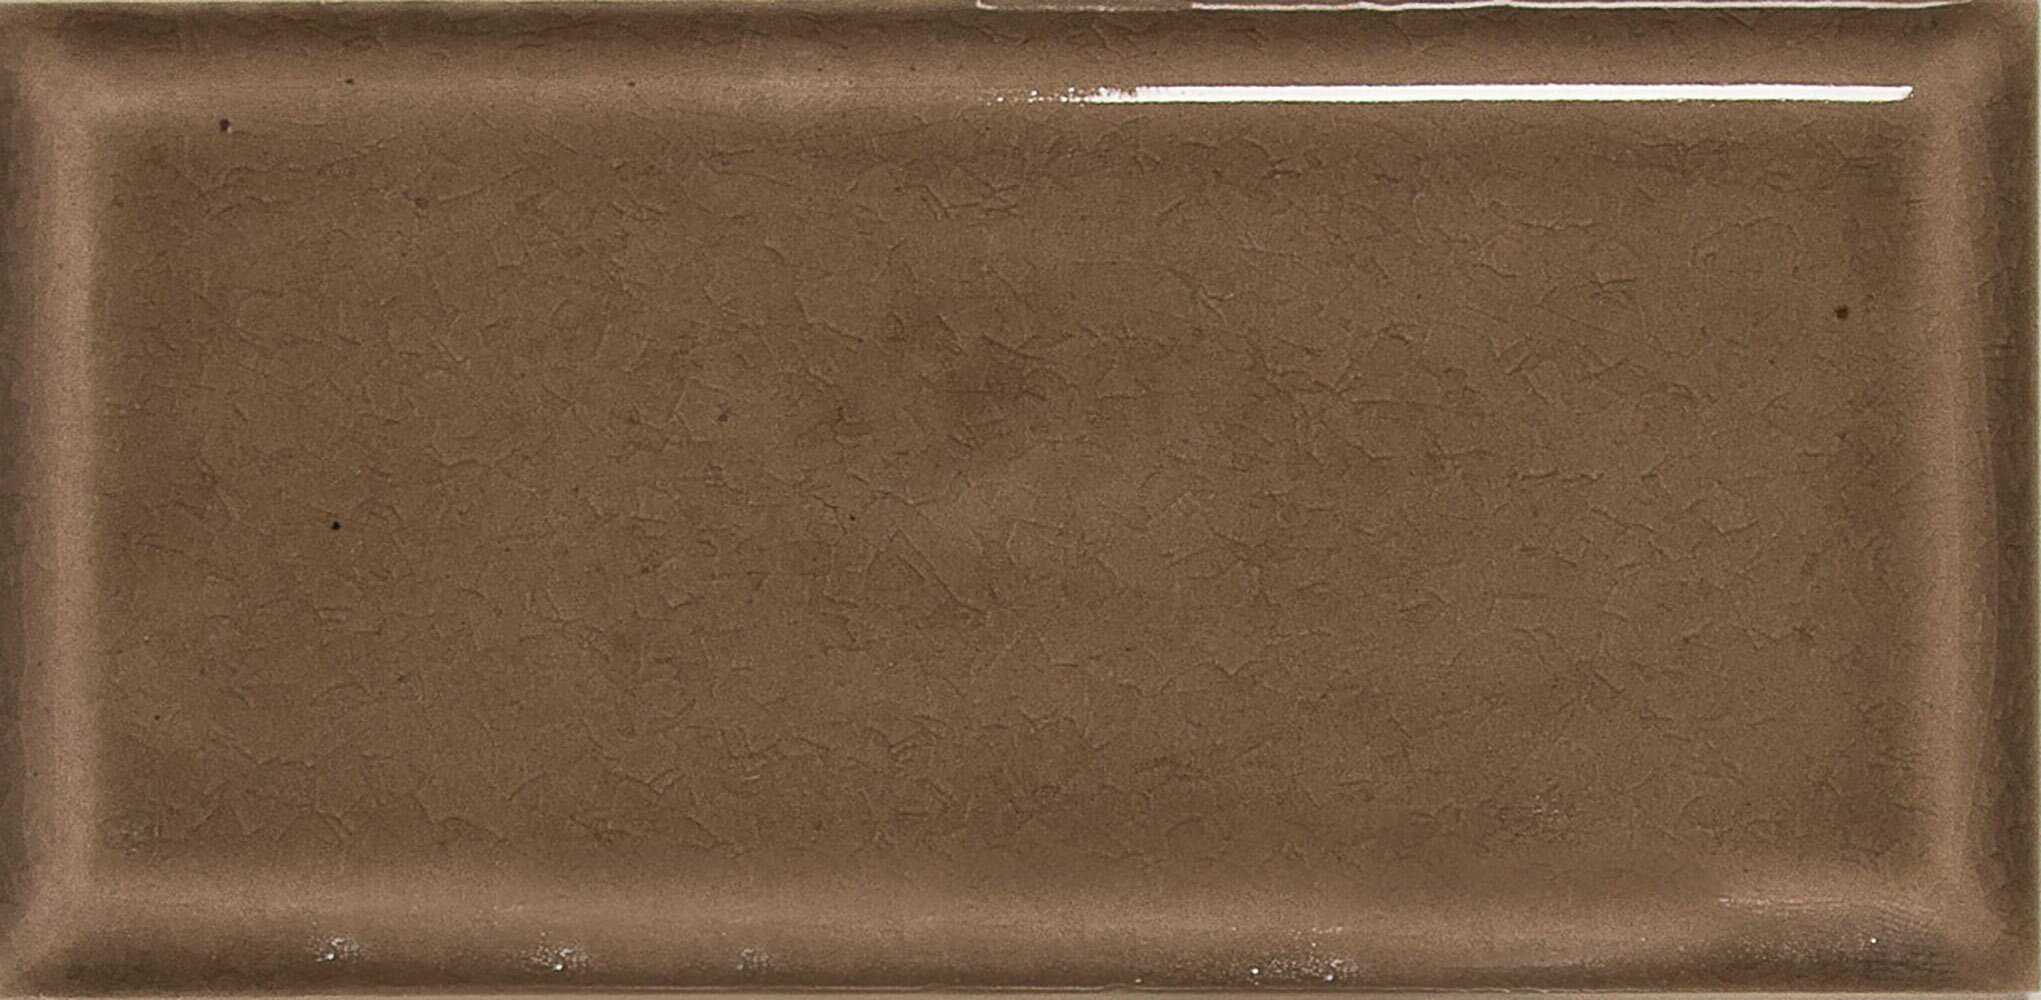 Cottage Collection 3" x 6" Field Tile in Color Soil